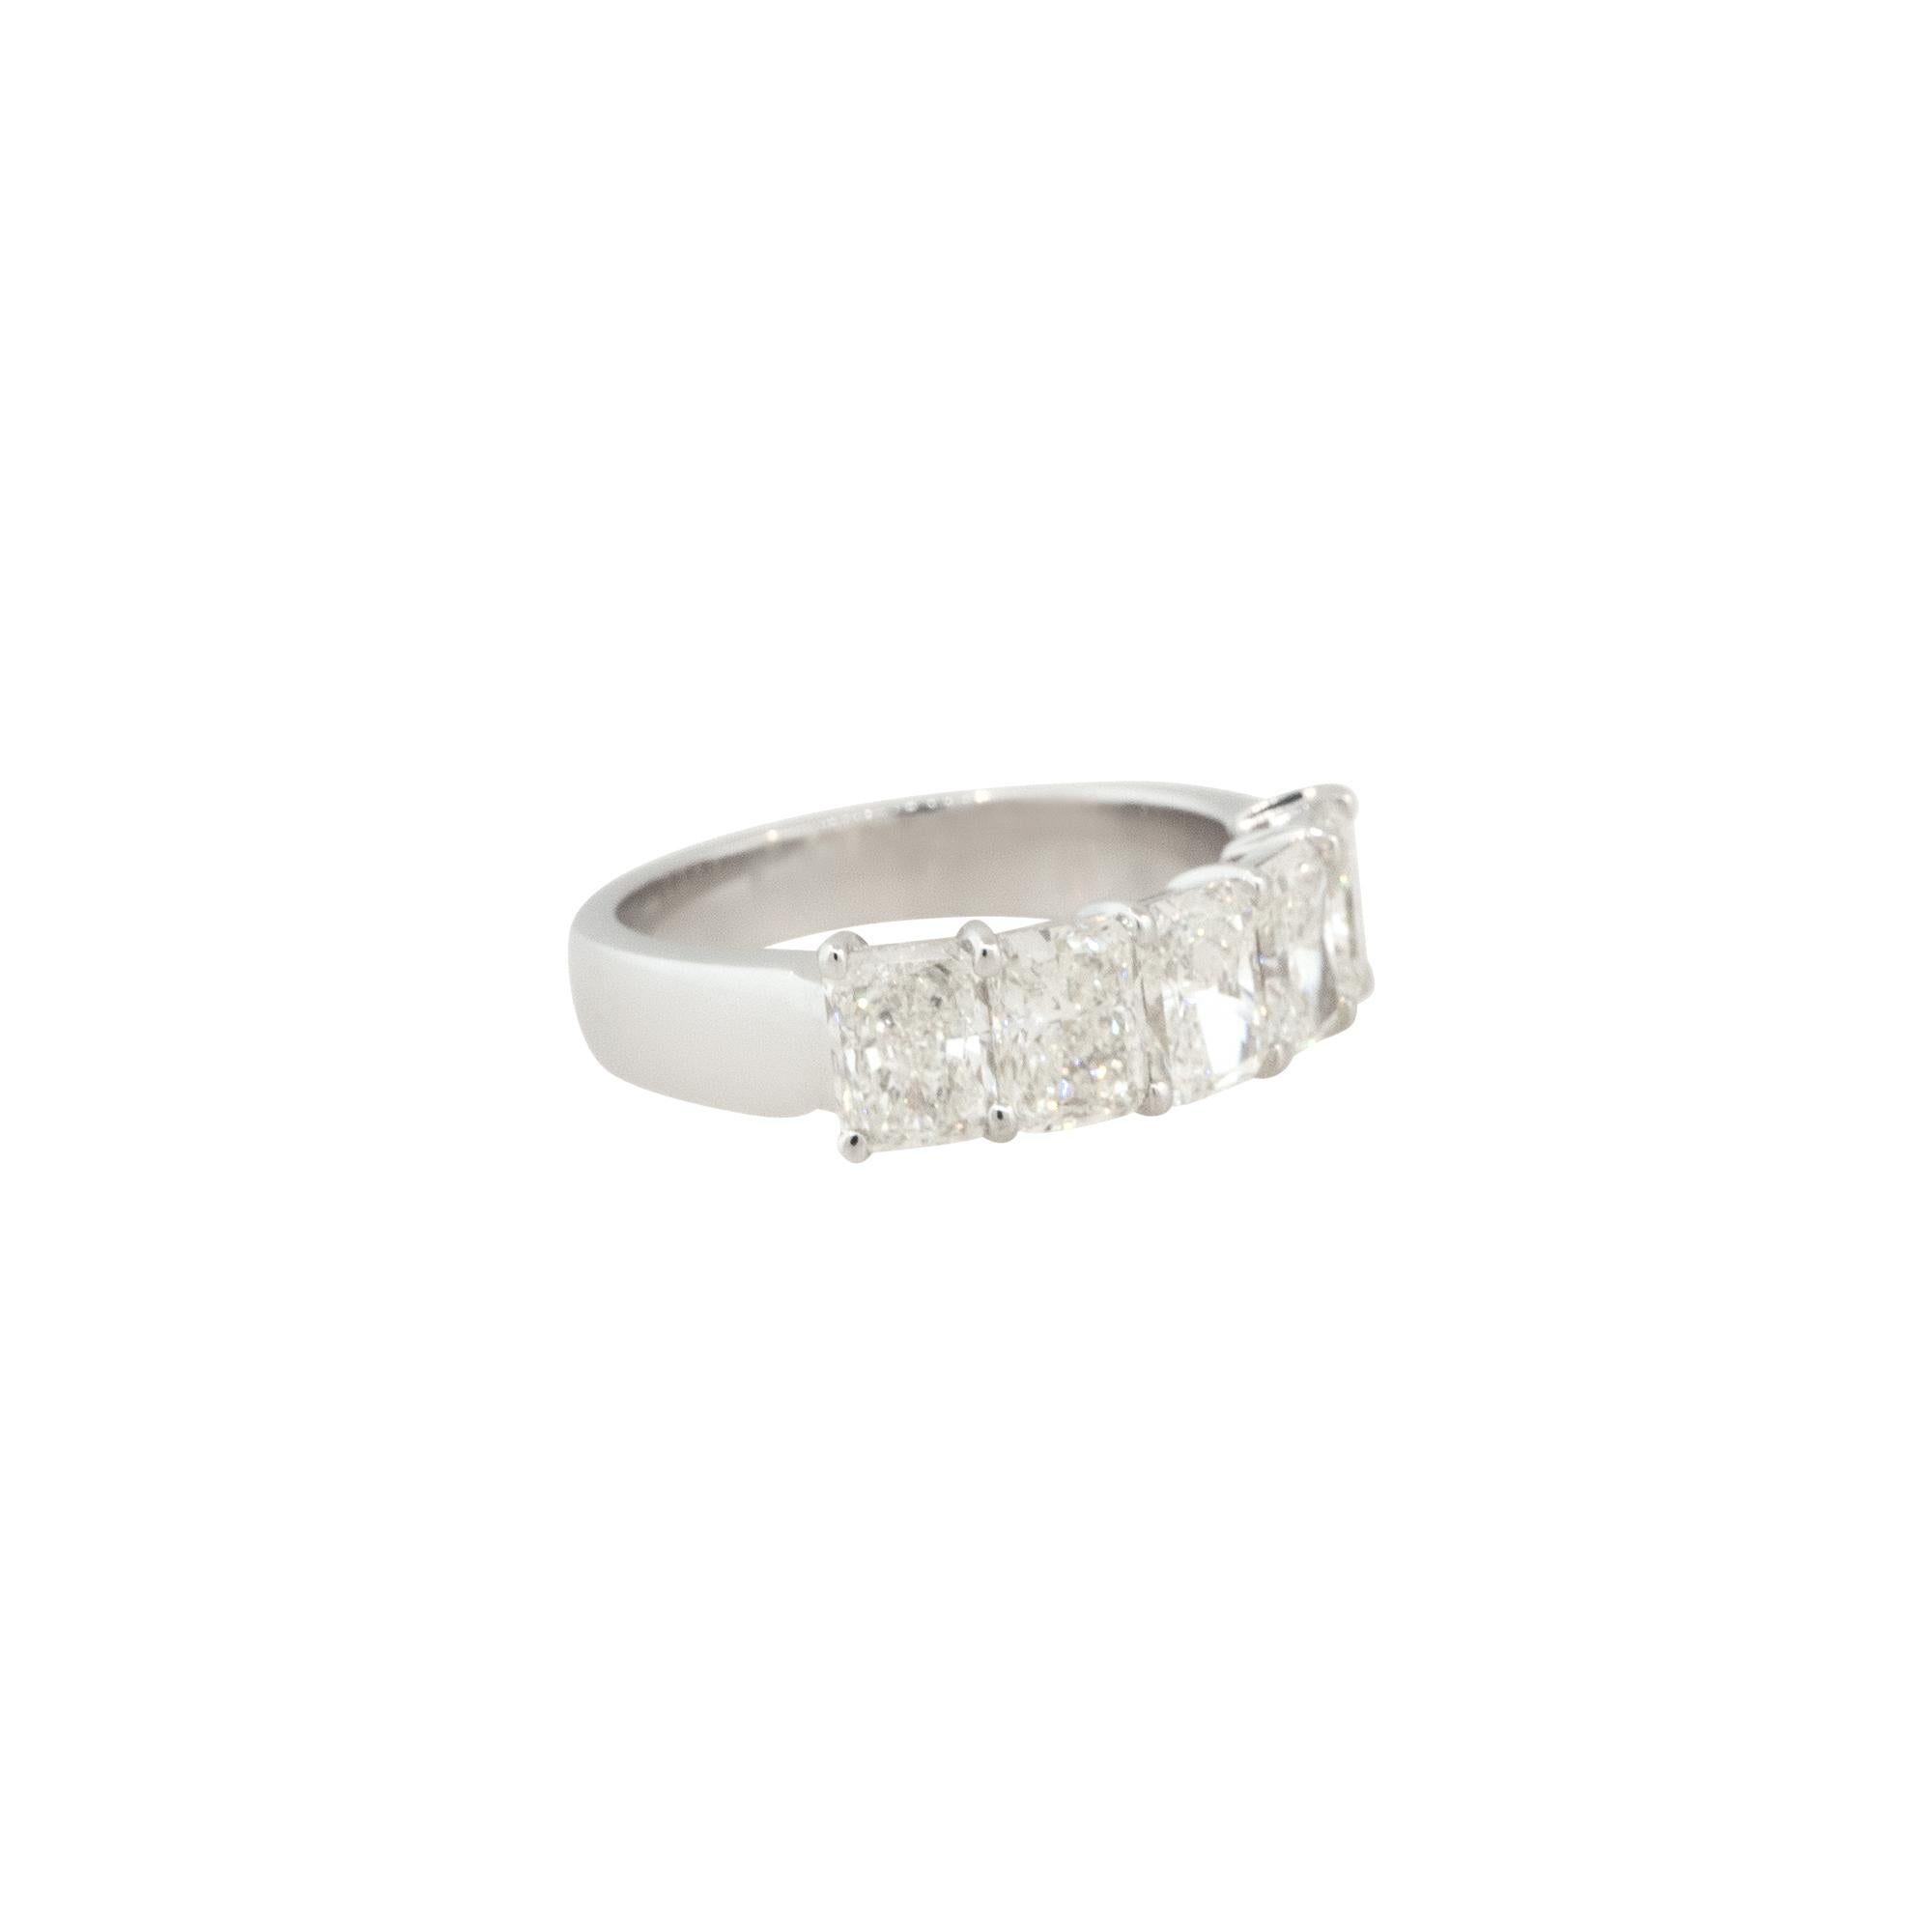 2.87 Carat 5 Stone Radiant Cut Diamond Wedding Band 18 Karat In Stock In Excellent Condition For Sale In Boca Raton, FL